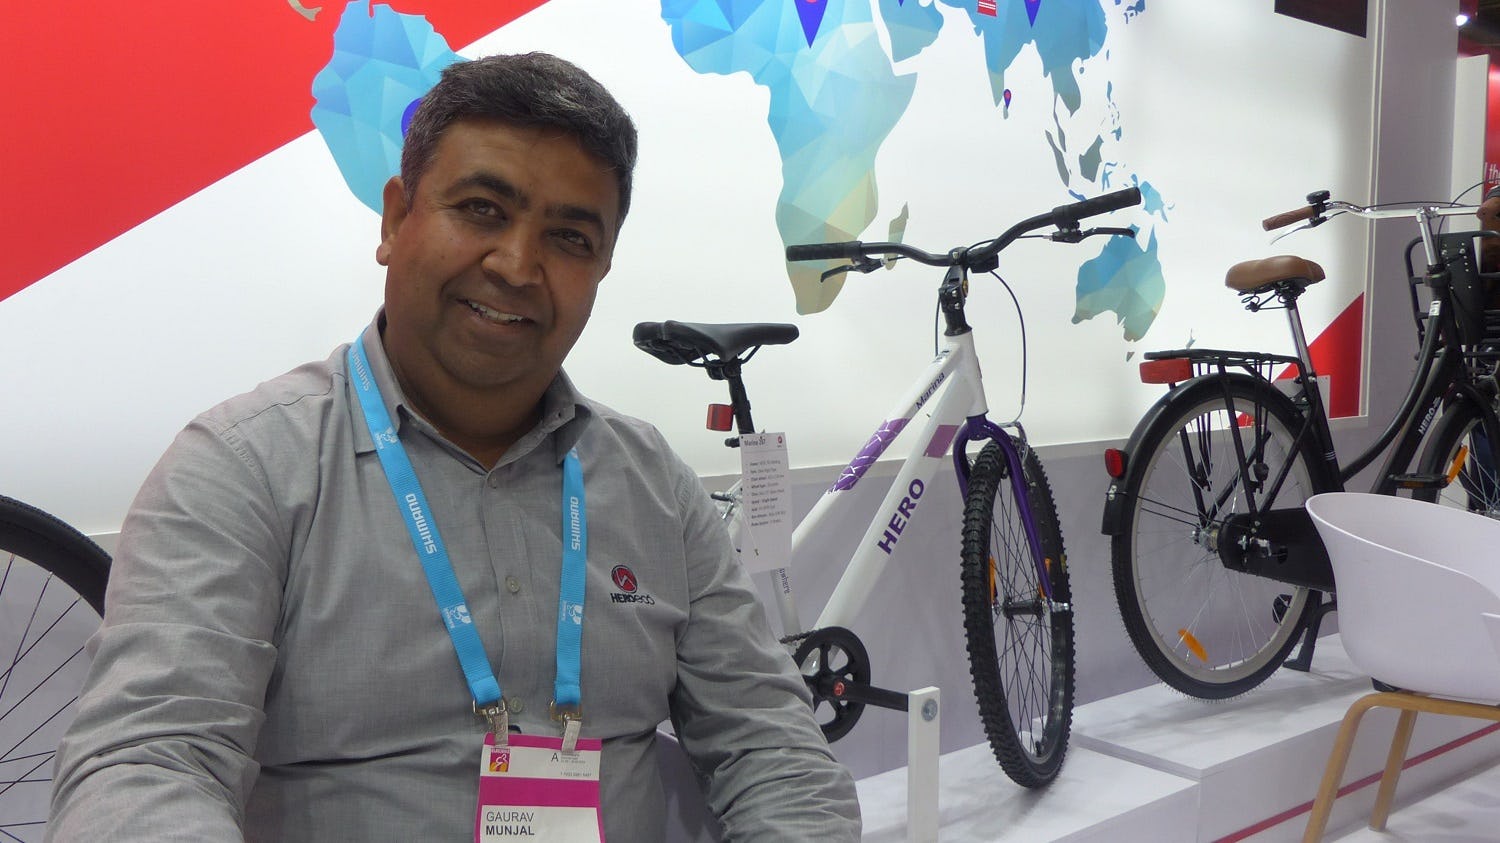 “We are still very confident, but the inventory situation has to stabilise first,” said Gaurav Munjal at Eurobike 2023. – Photo Bike Europe